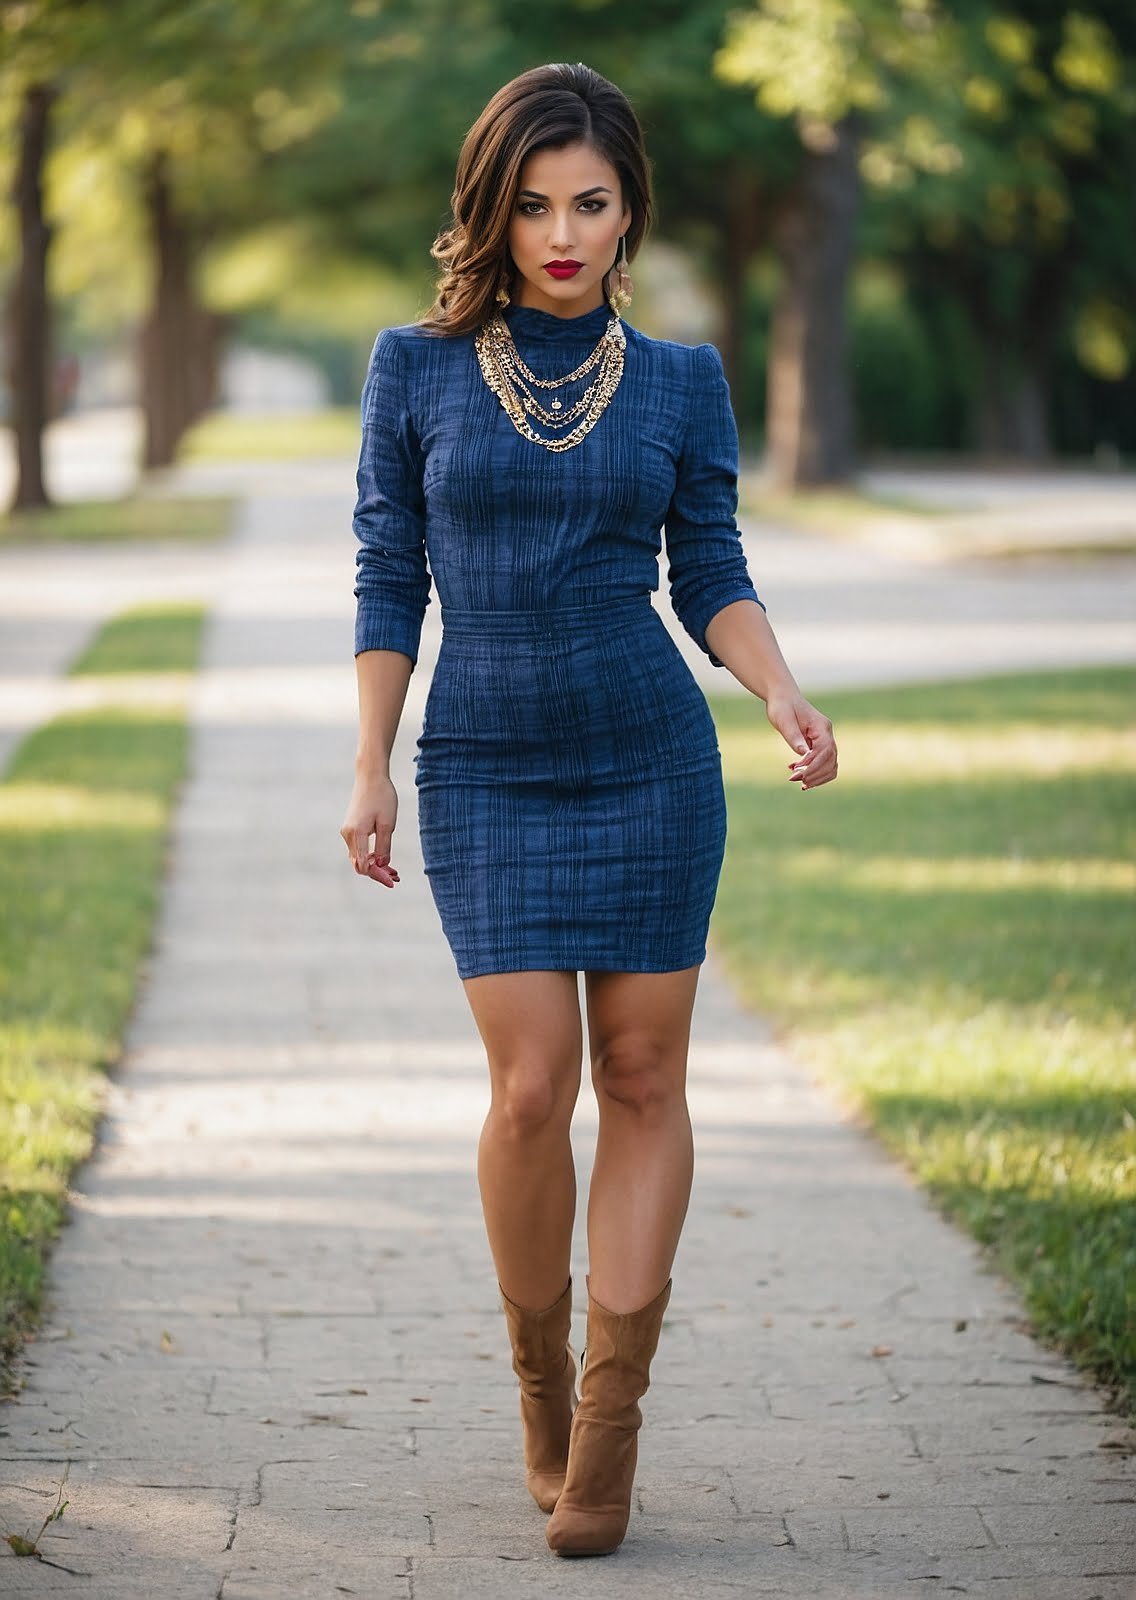 Urban Sophisticate: Plaid Pencil Dress with Statement Necklace